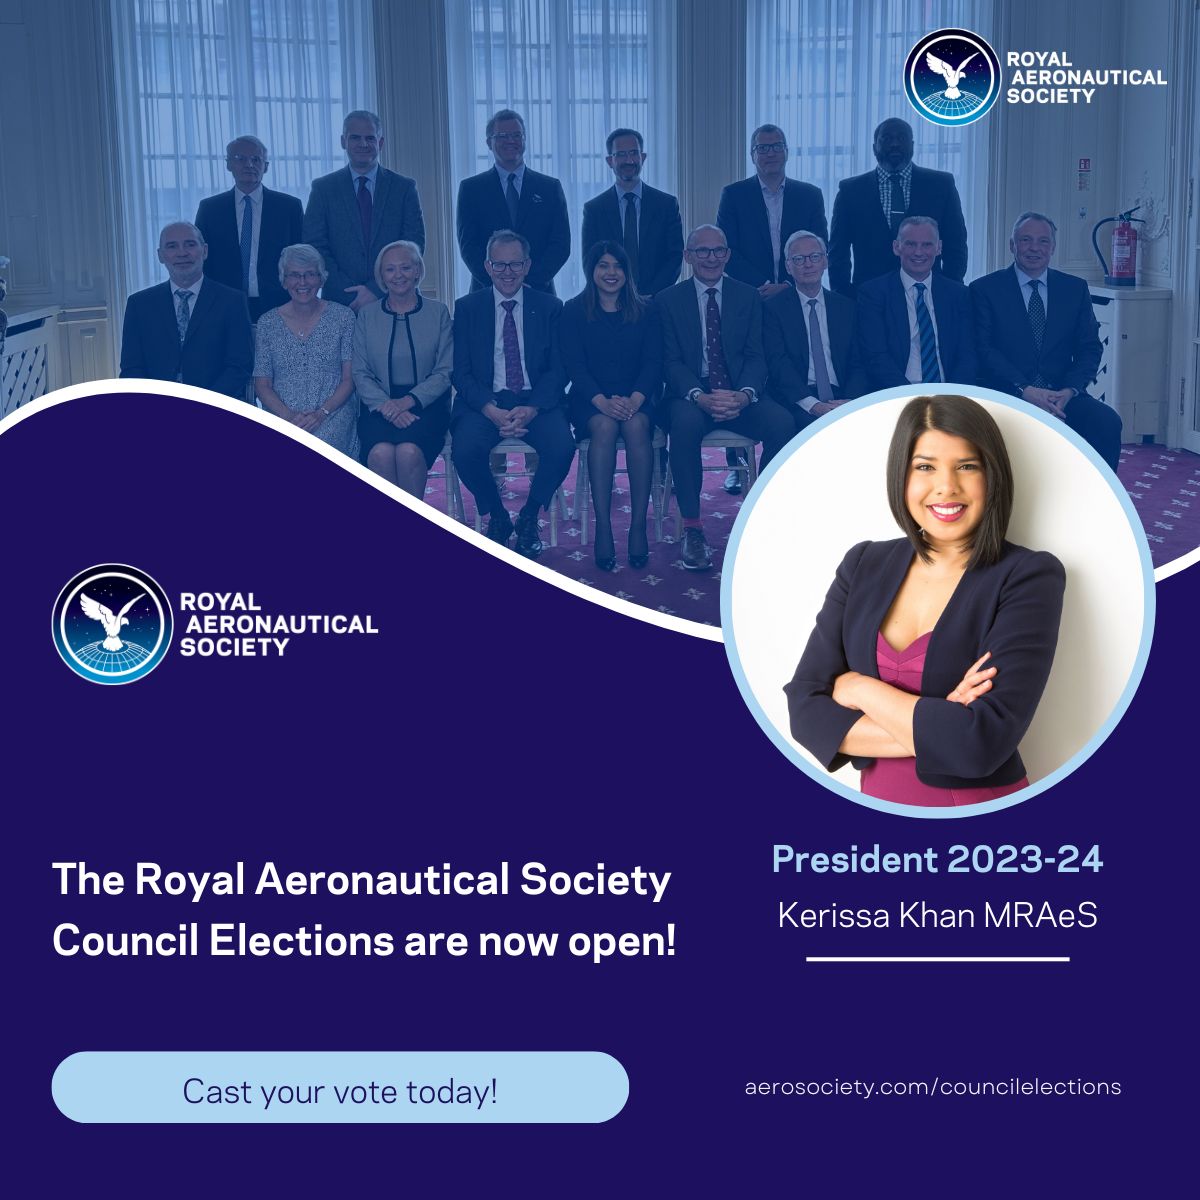 If you are a voting member ensure you submit your vote for the Royal Aeronautical Society Council Elections by 9 May 2024. Vote here: ow.ly/O0NF50R8slT